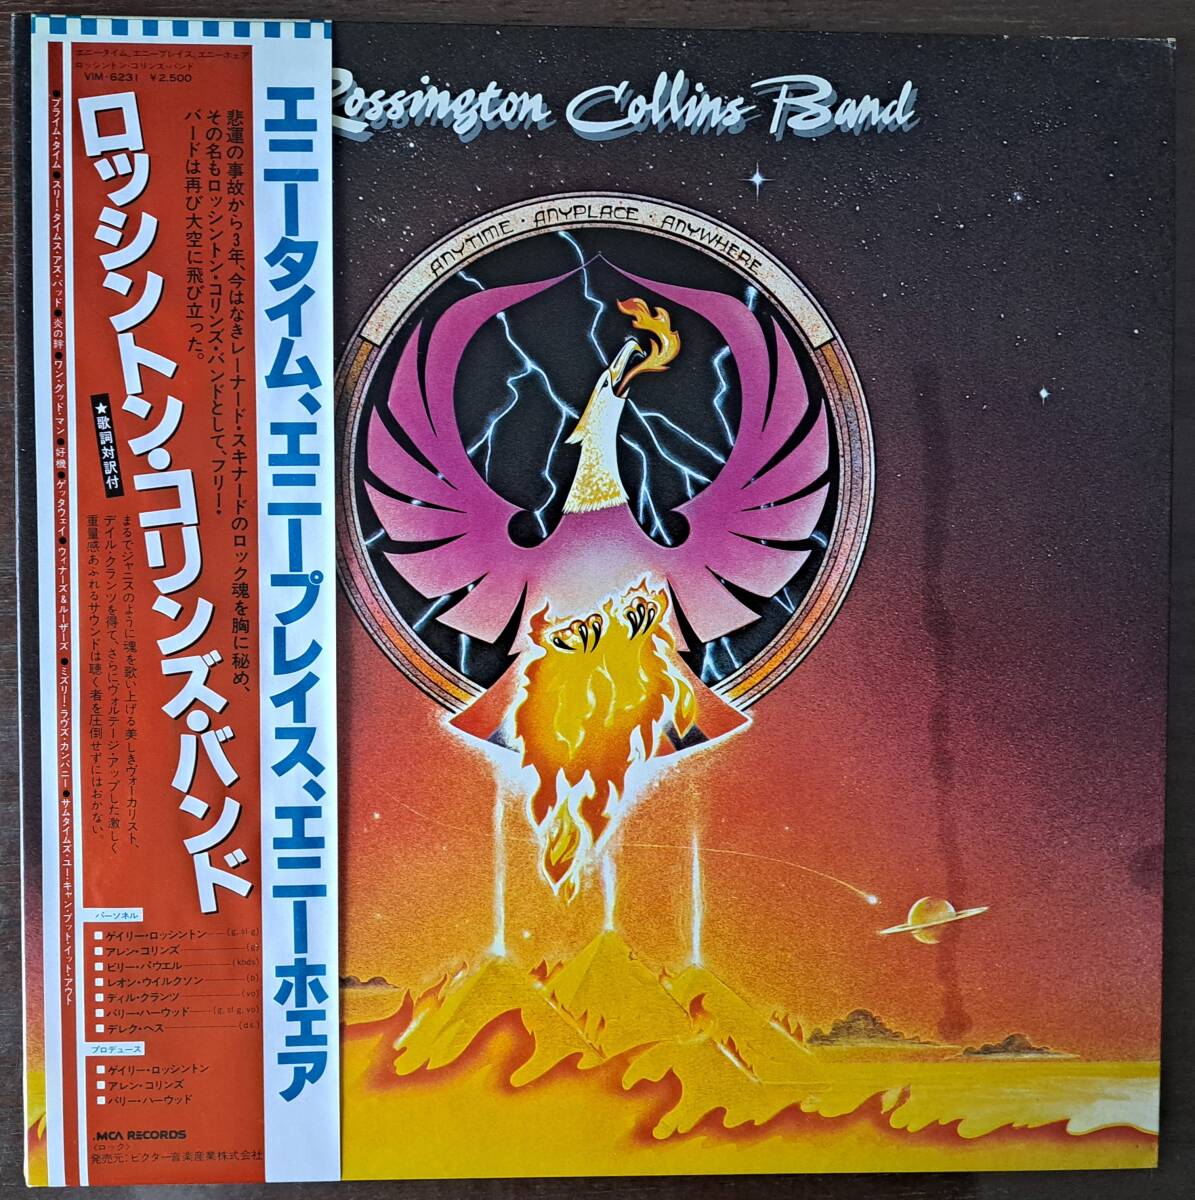 【LPレコード洋楽】ROSSINGTON COLLONS BAND - ANYTIME,ANYPLACE,ANYWHERE (ロッシントン・コリンズ・バンド)_画像1